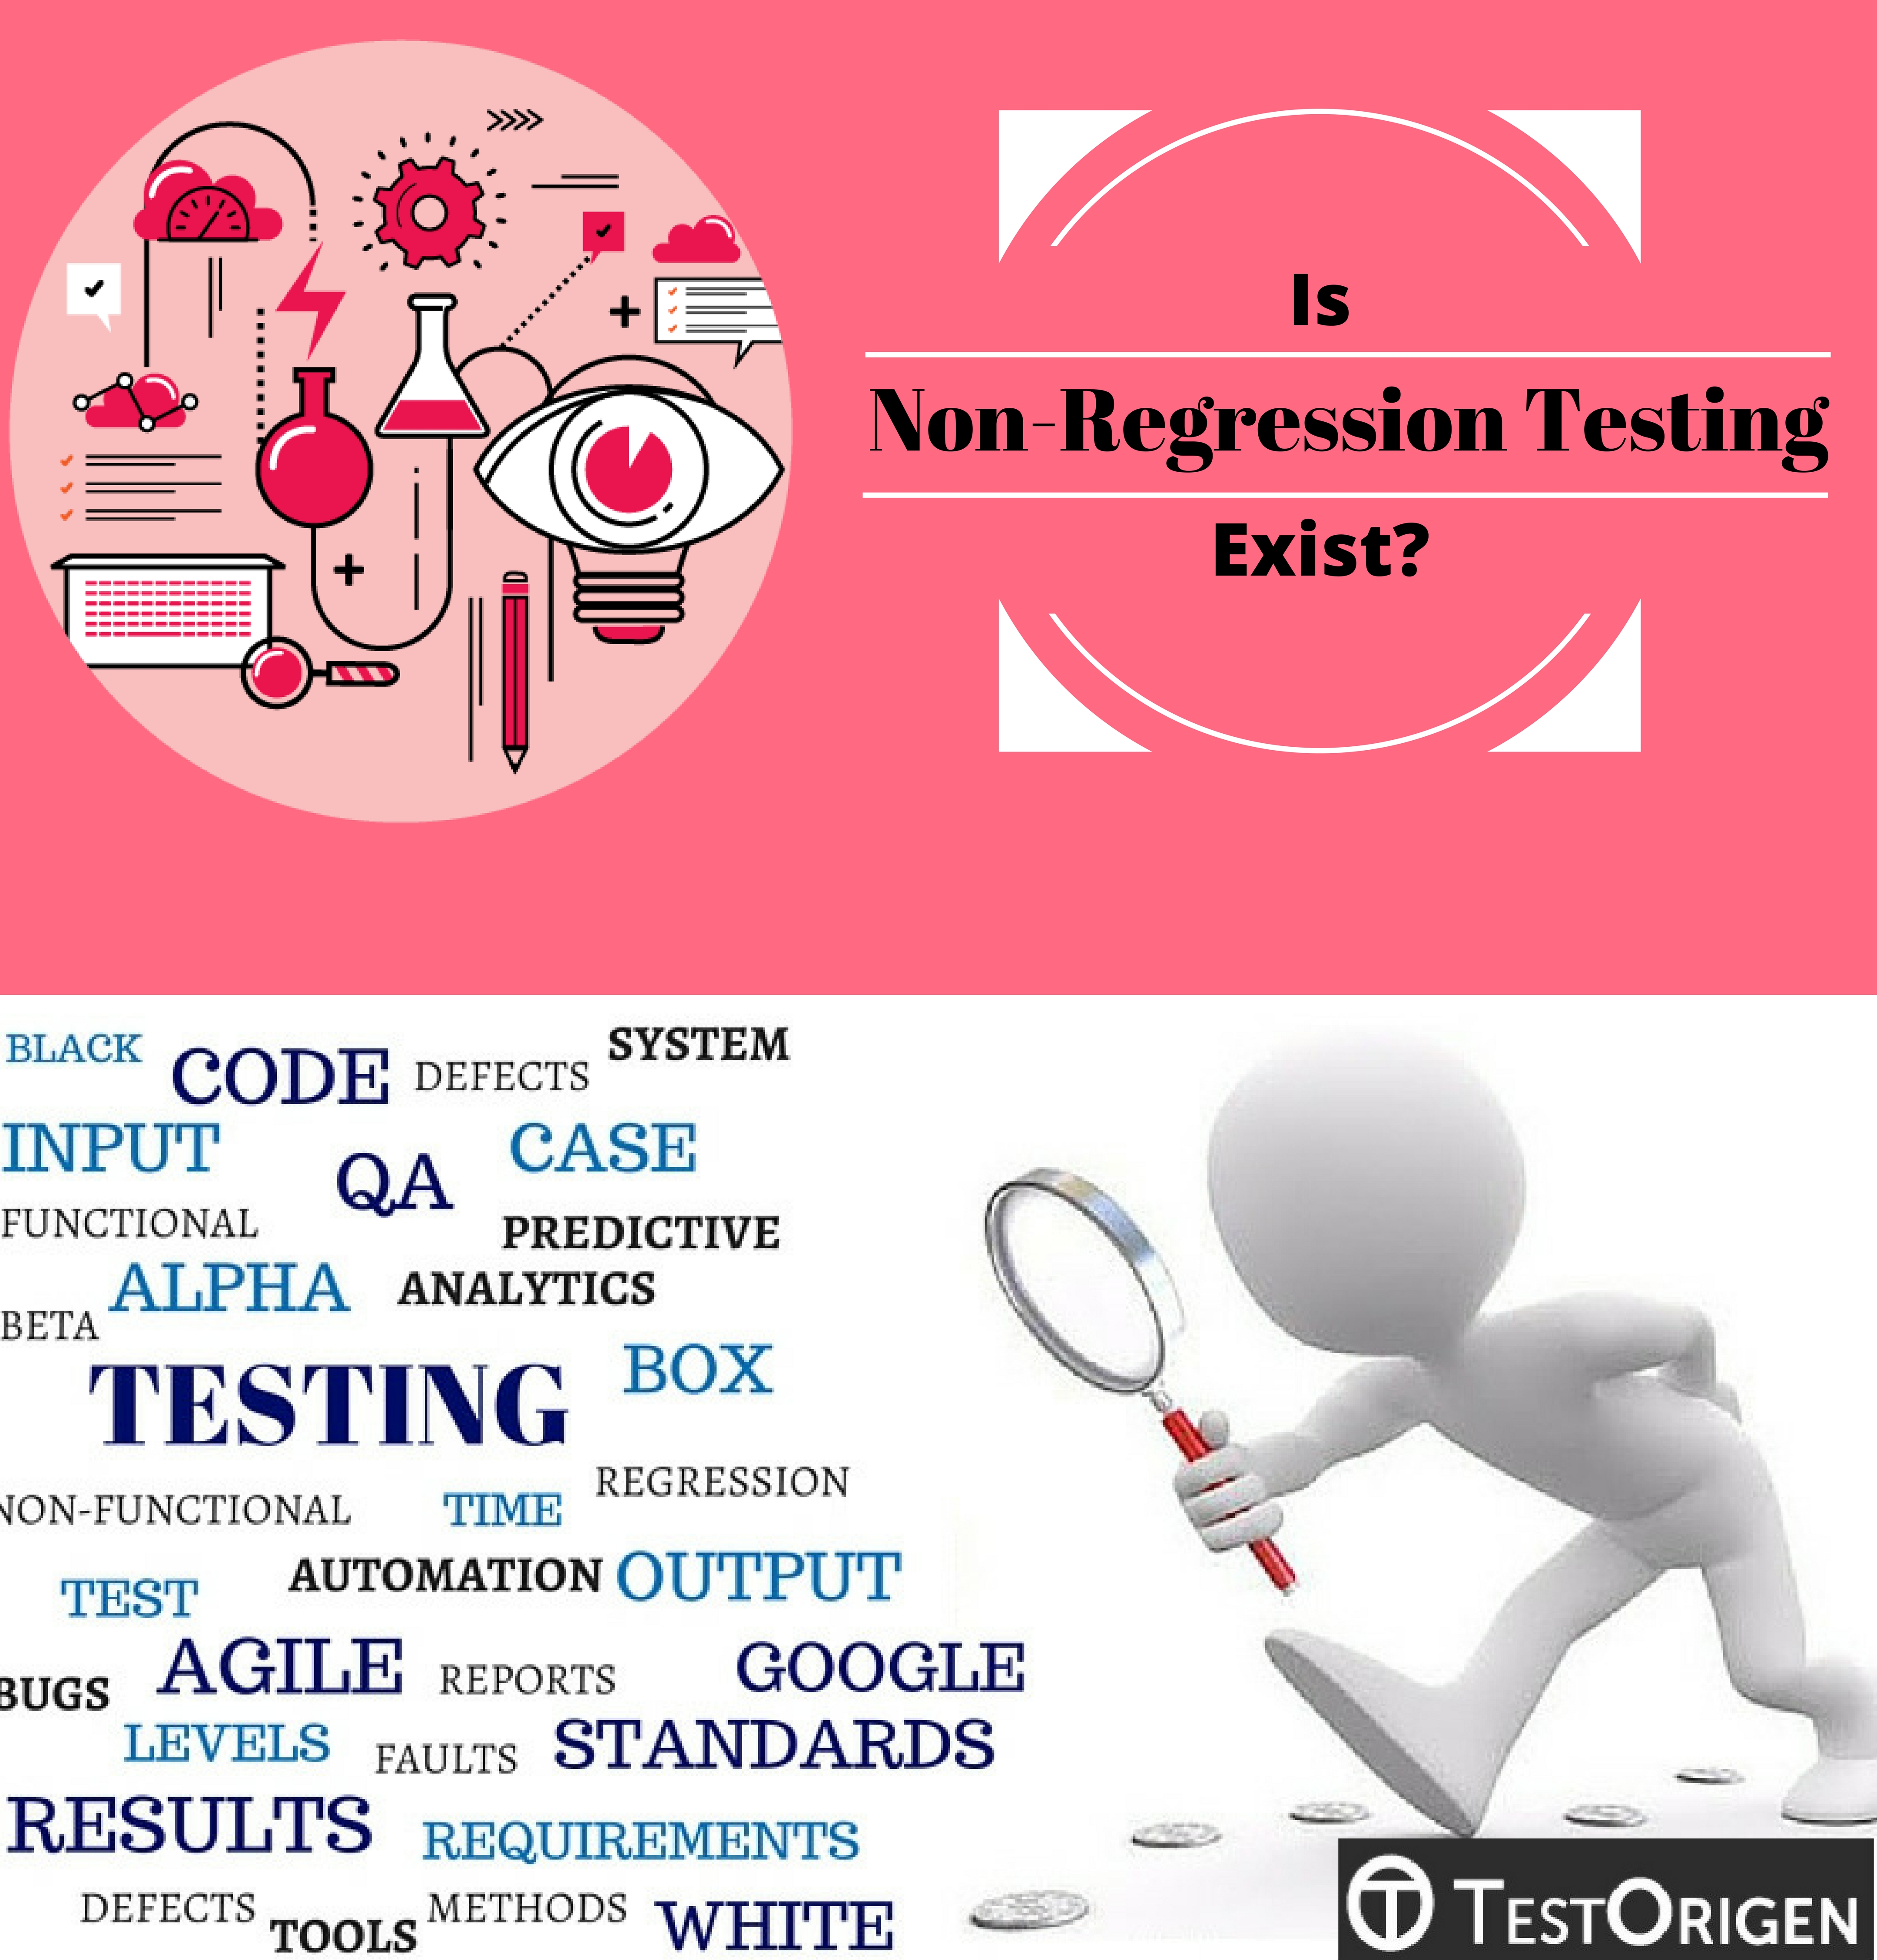 is non-regression testing exist?